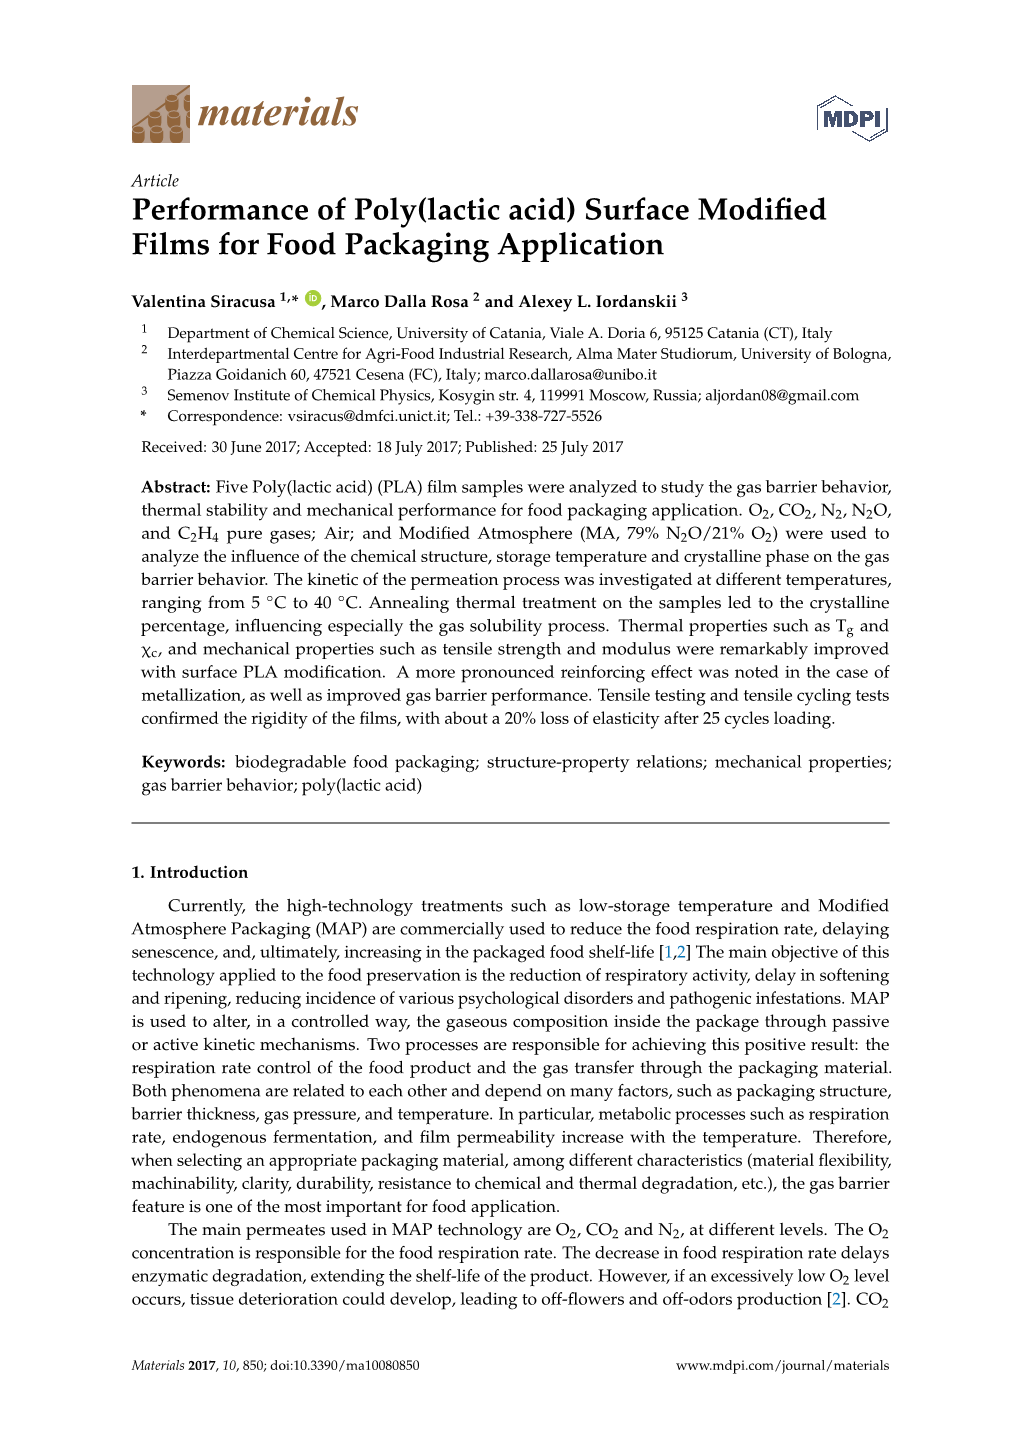 Performance of Poly(Lactic Acid) Surface Modified Films for Food